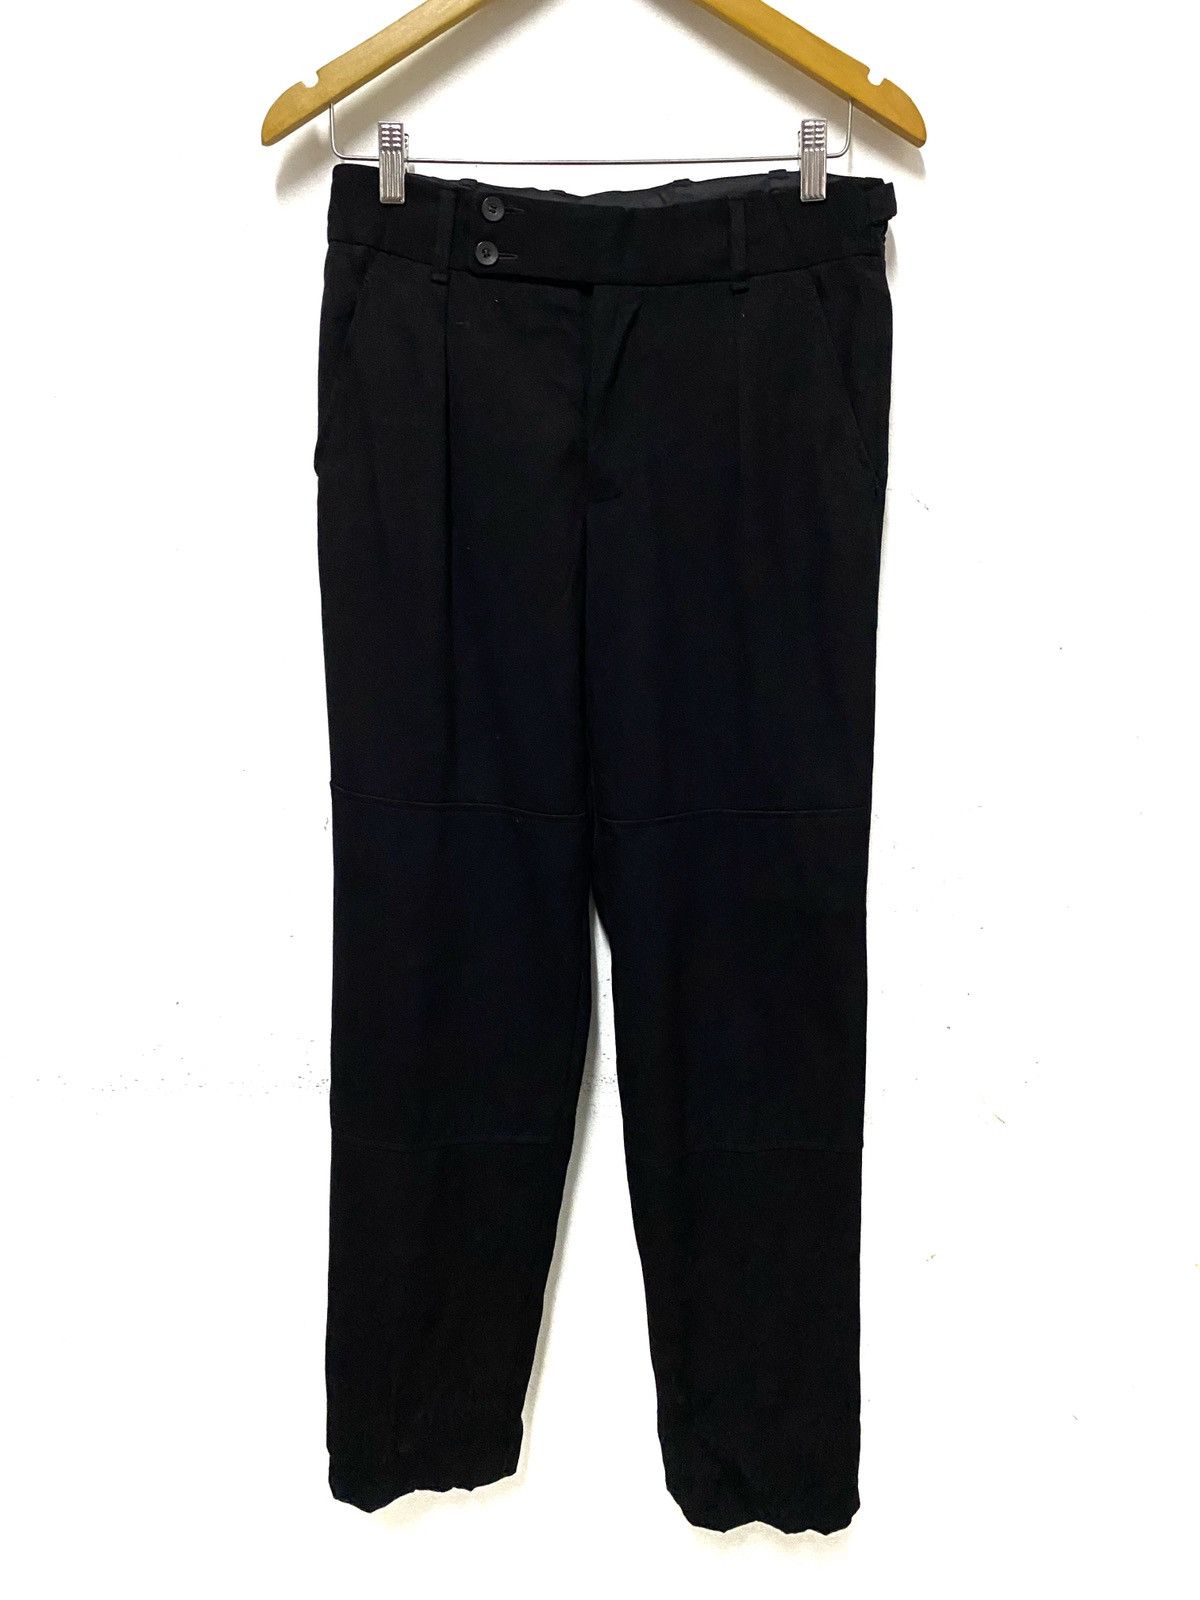 Gucci Lana Wool Pants Made in Italy - 1